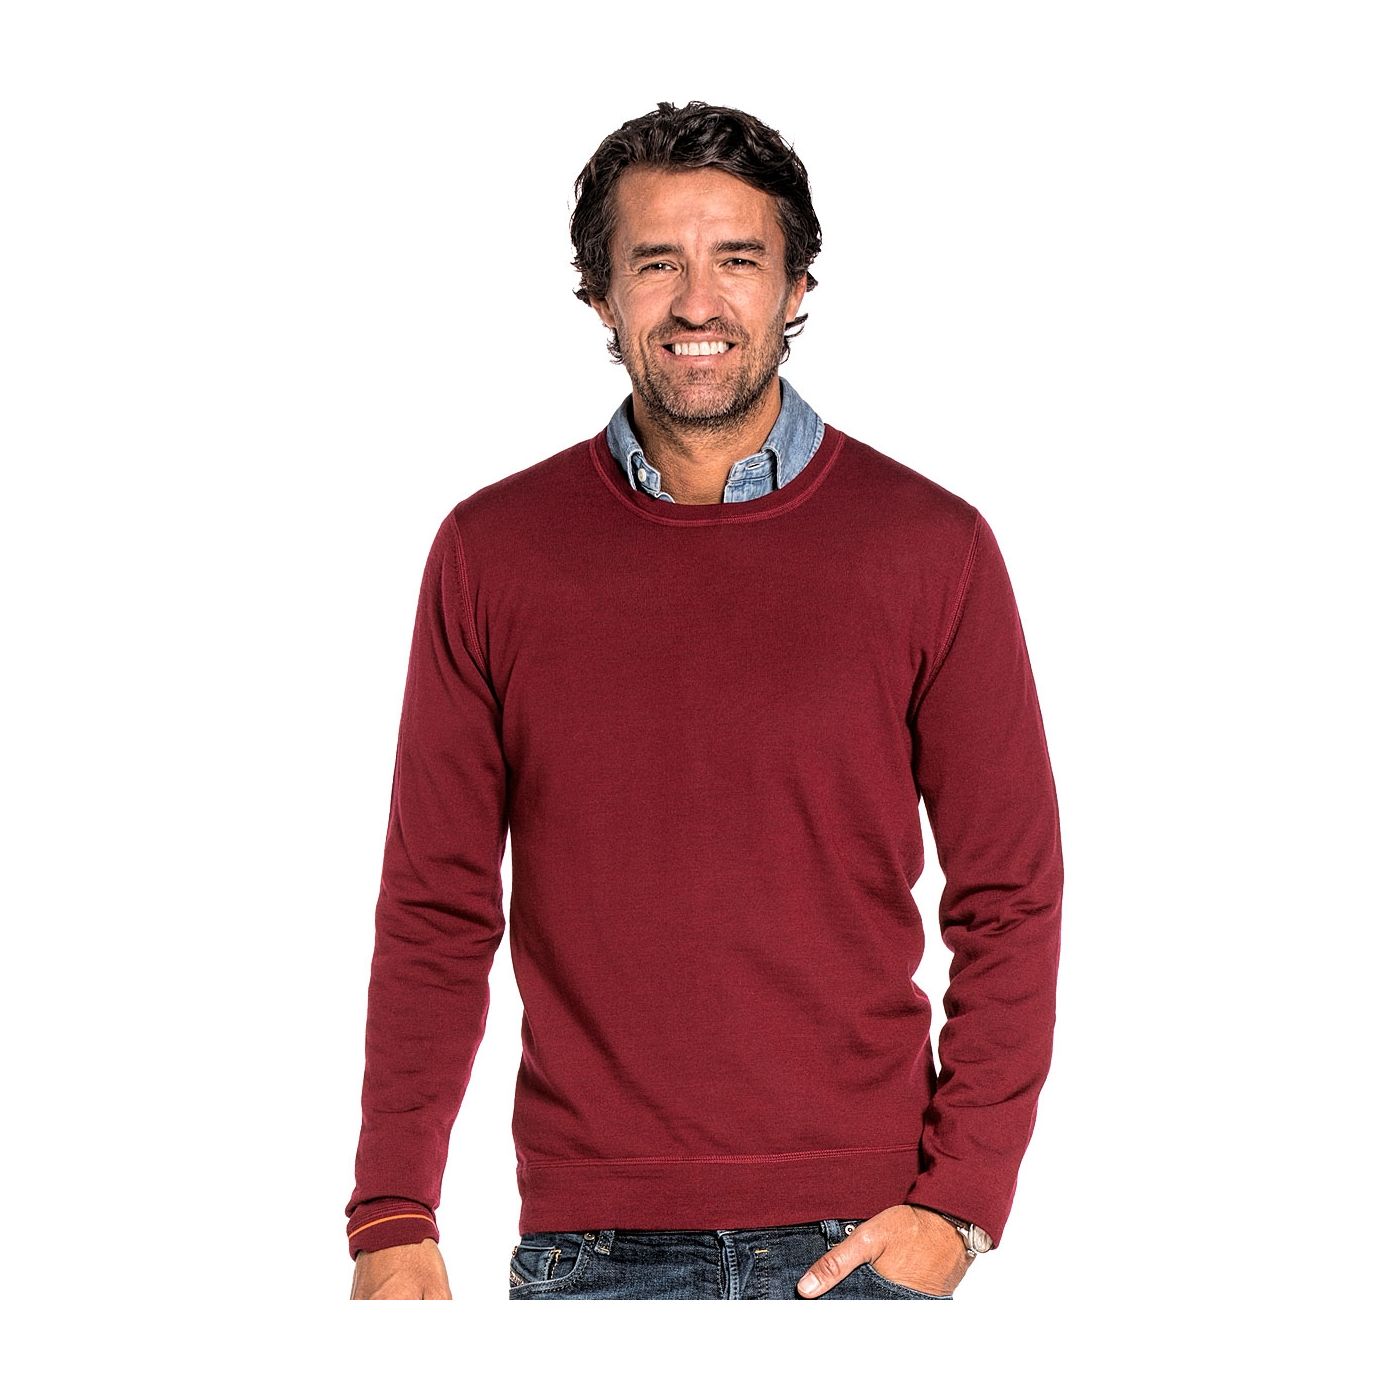 Crew neck pullover for men made of Merino wool in Red